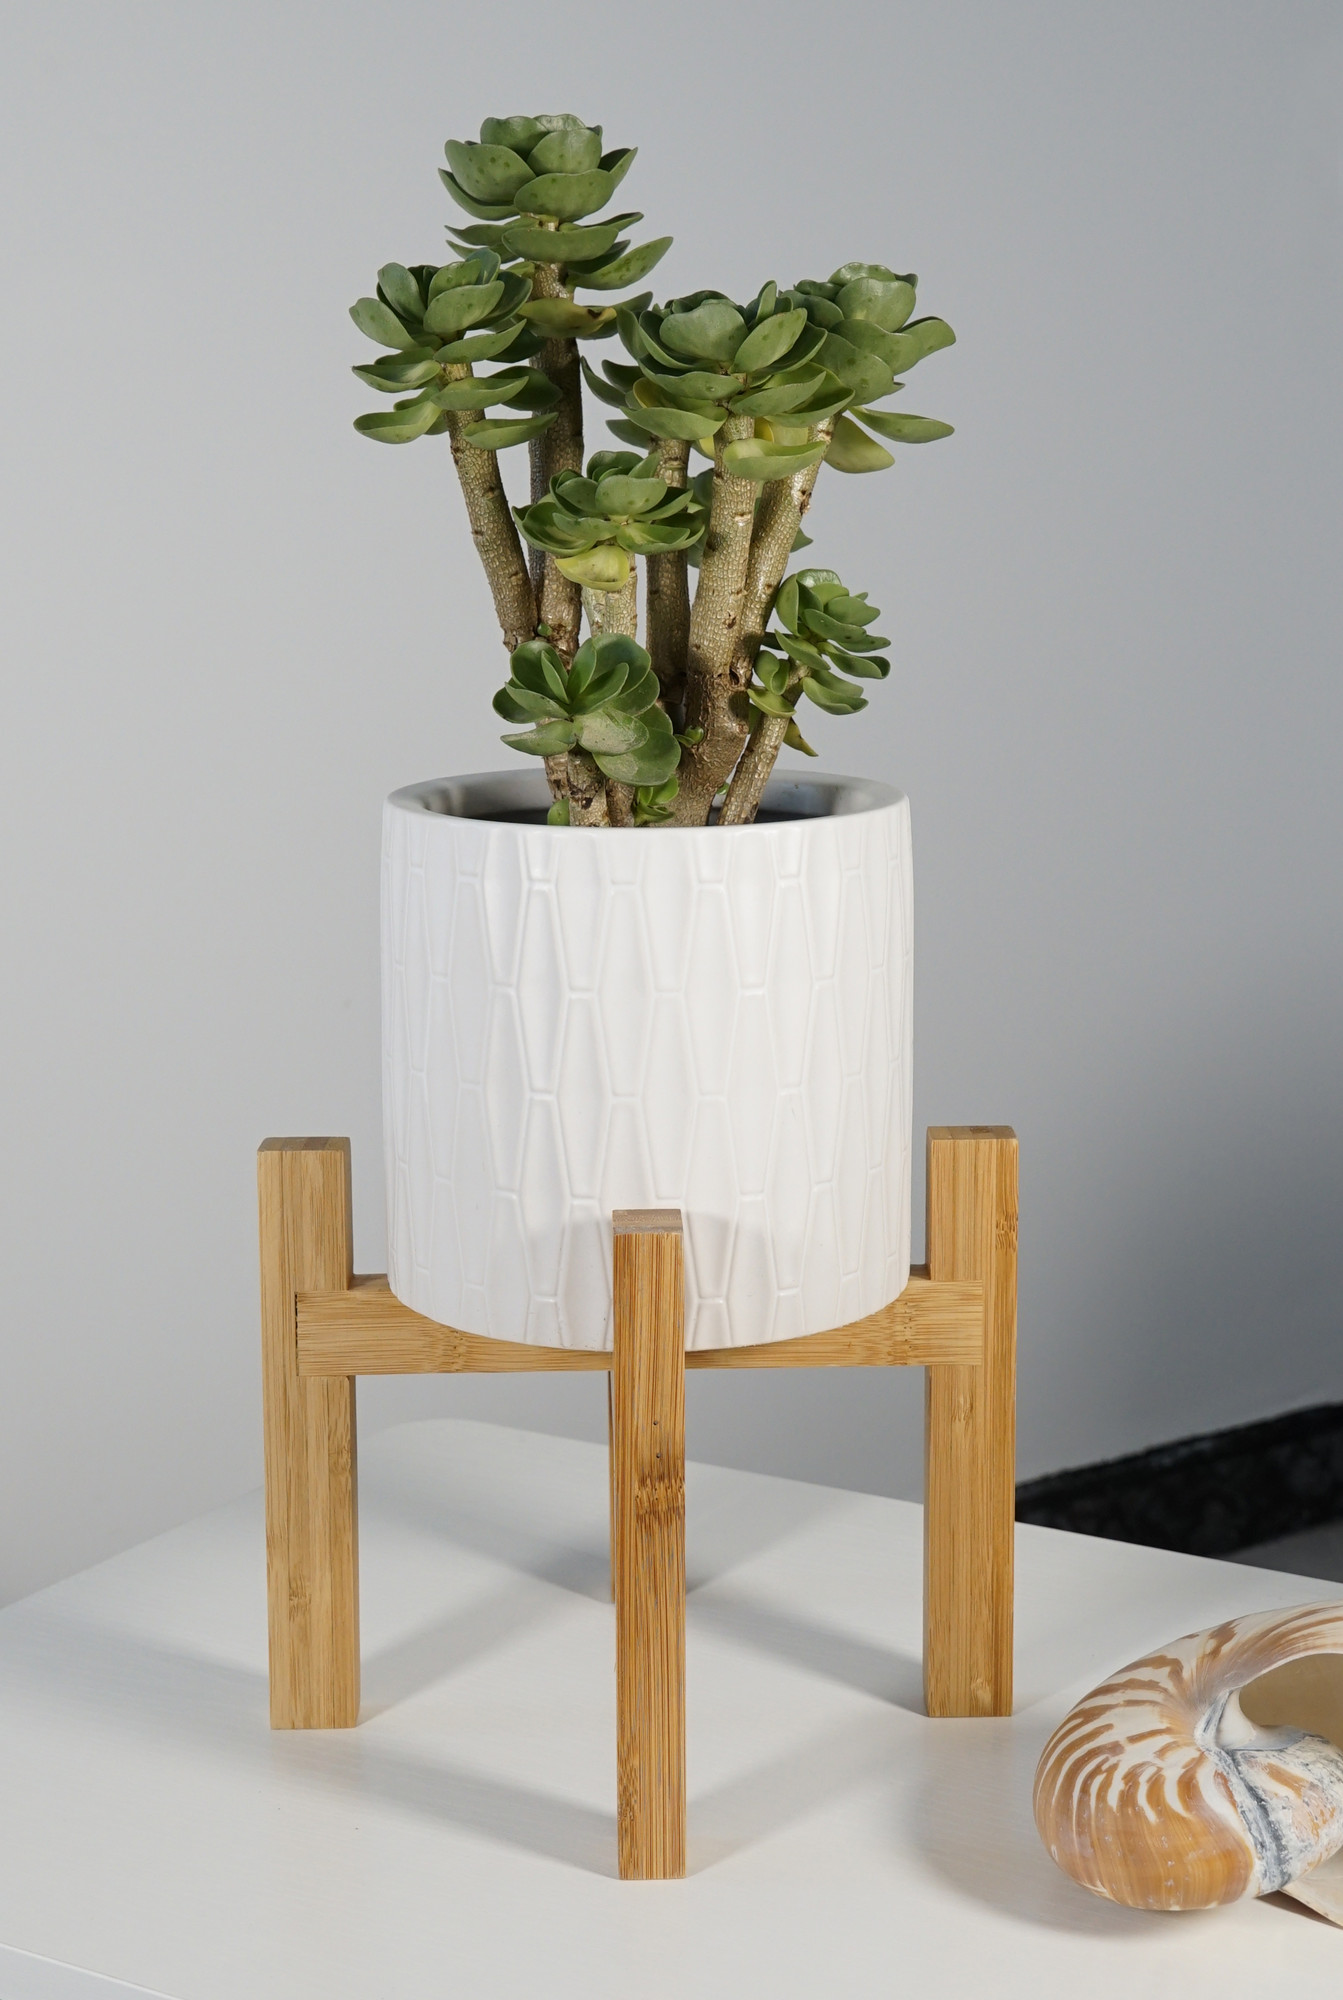 Better Homes & Gardens 6in Kennewick Ceramic Planter With Stand, White - image 2 of 8